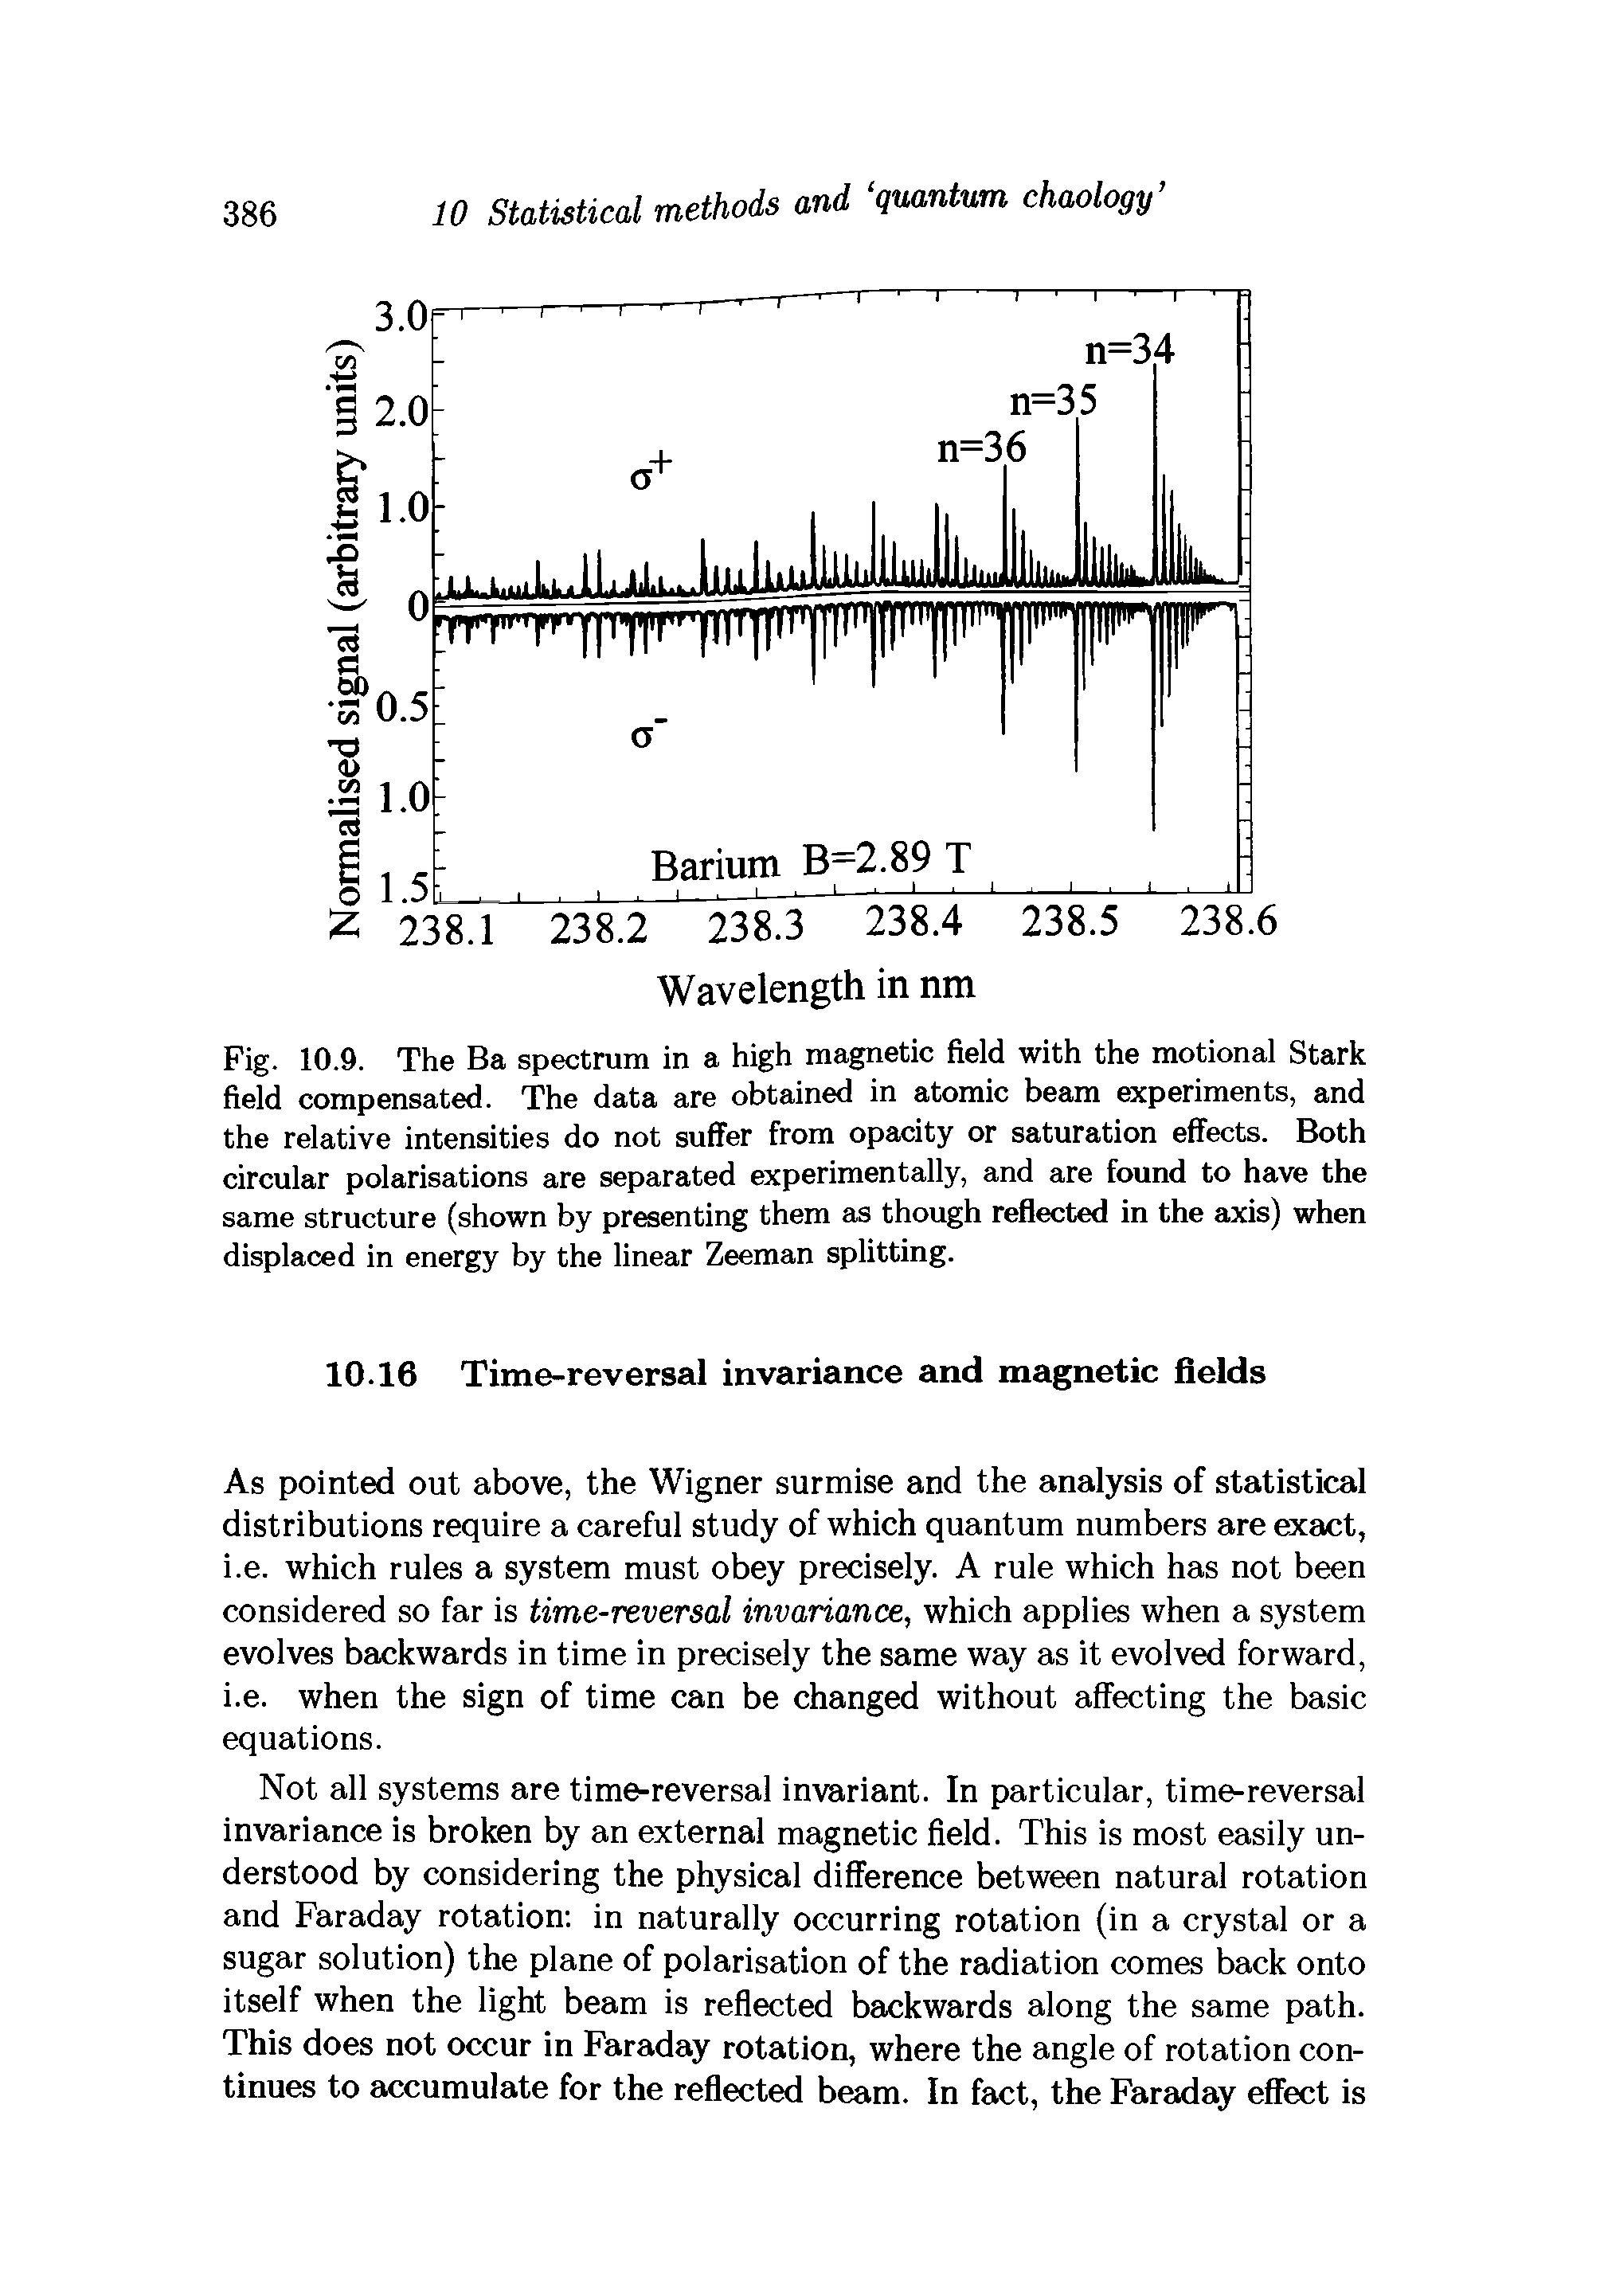 Fig. 10.9. The Ba spectrum in a high magnetic field with the motional Stark field compensated. The data are obtained in atomic beam experiments, and the relative intensities do not suffer from opacity or saturation effects. Both circular polarisations are separated experimentally, and are found to have the same structure (shown by presenting them as though reflected in the axis) when displaced in energy by the linear Zeeman splitting.